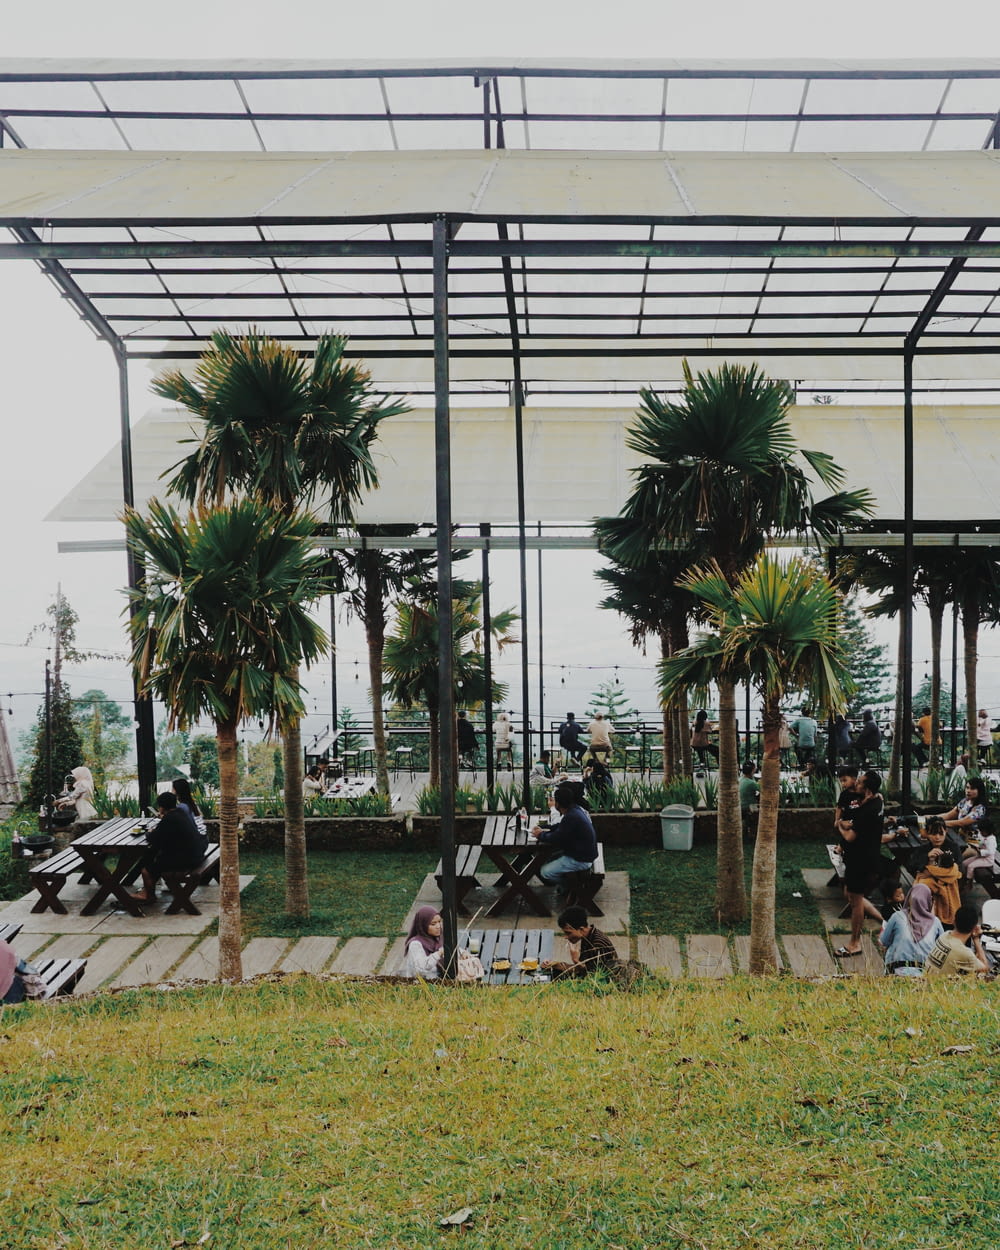 a group of people sitting on benches under a canopy